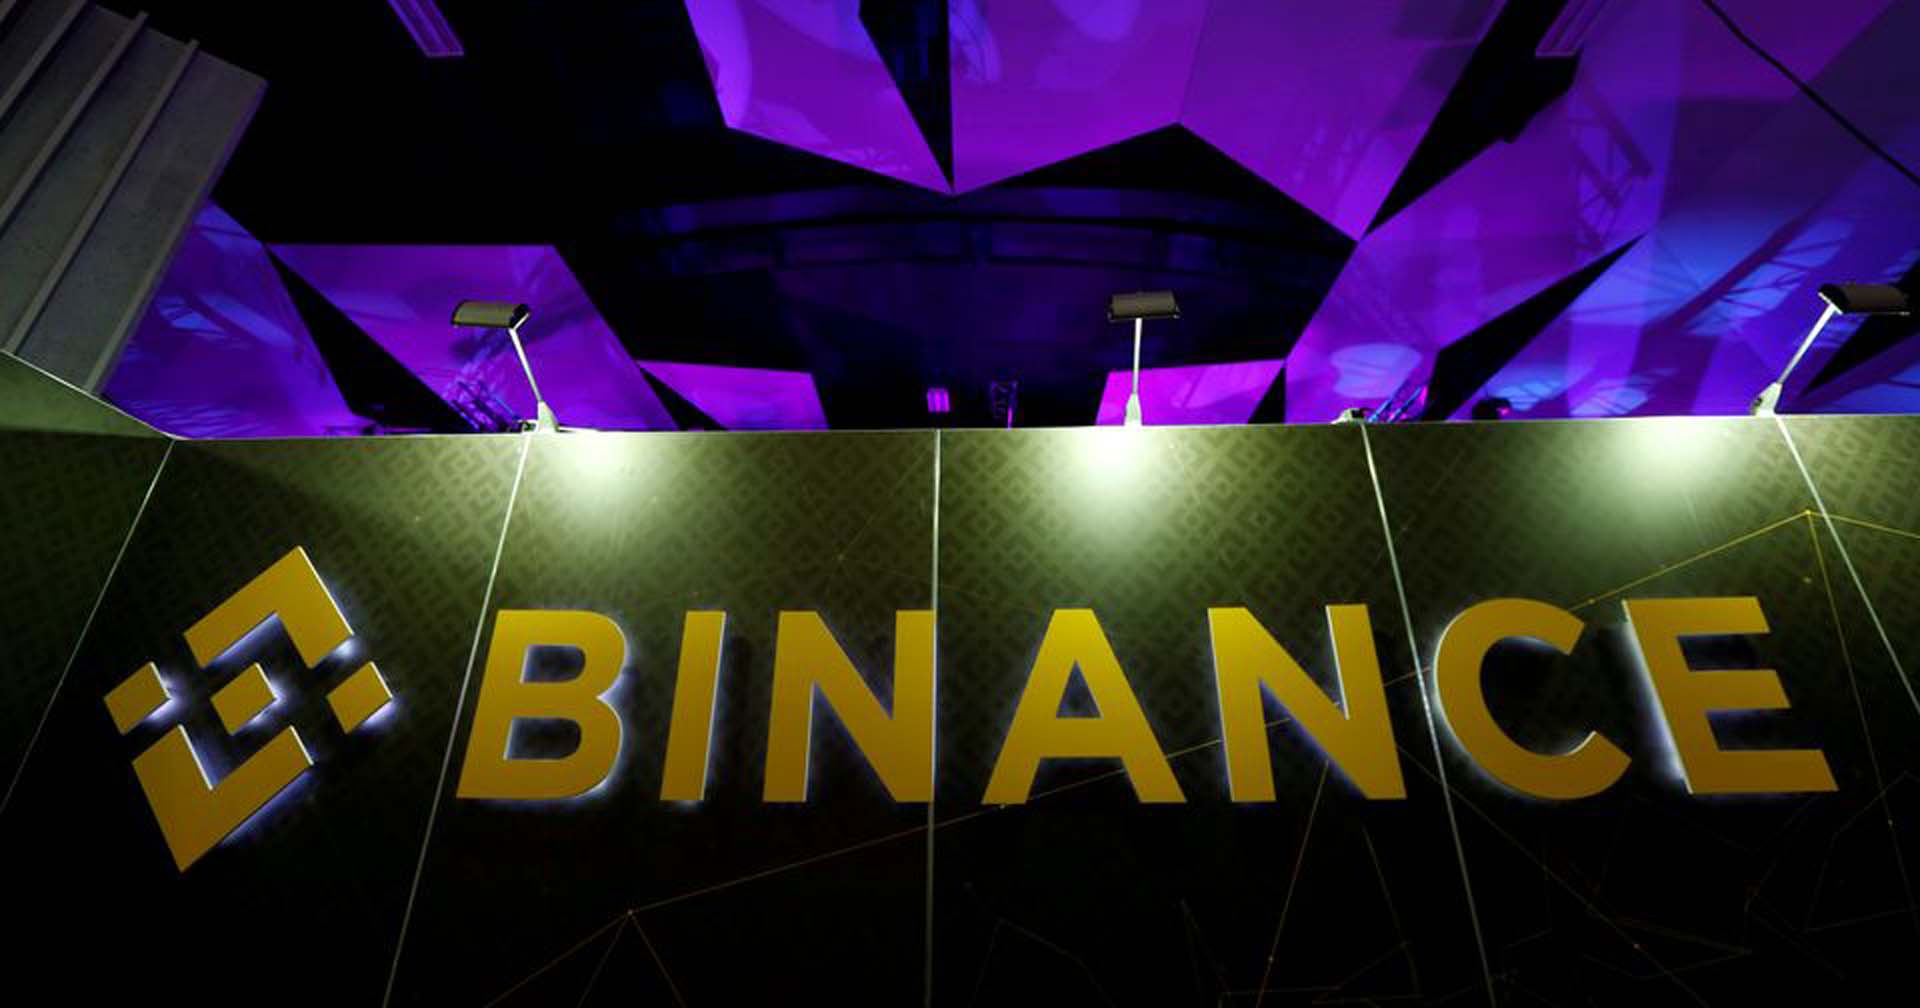 Binance deepens Middle East expansion with Abu Dhabi approval